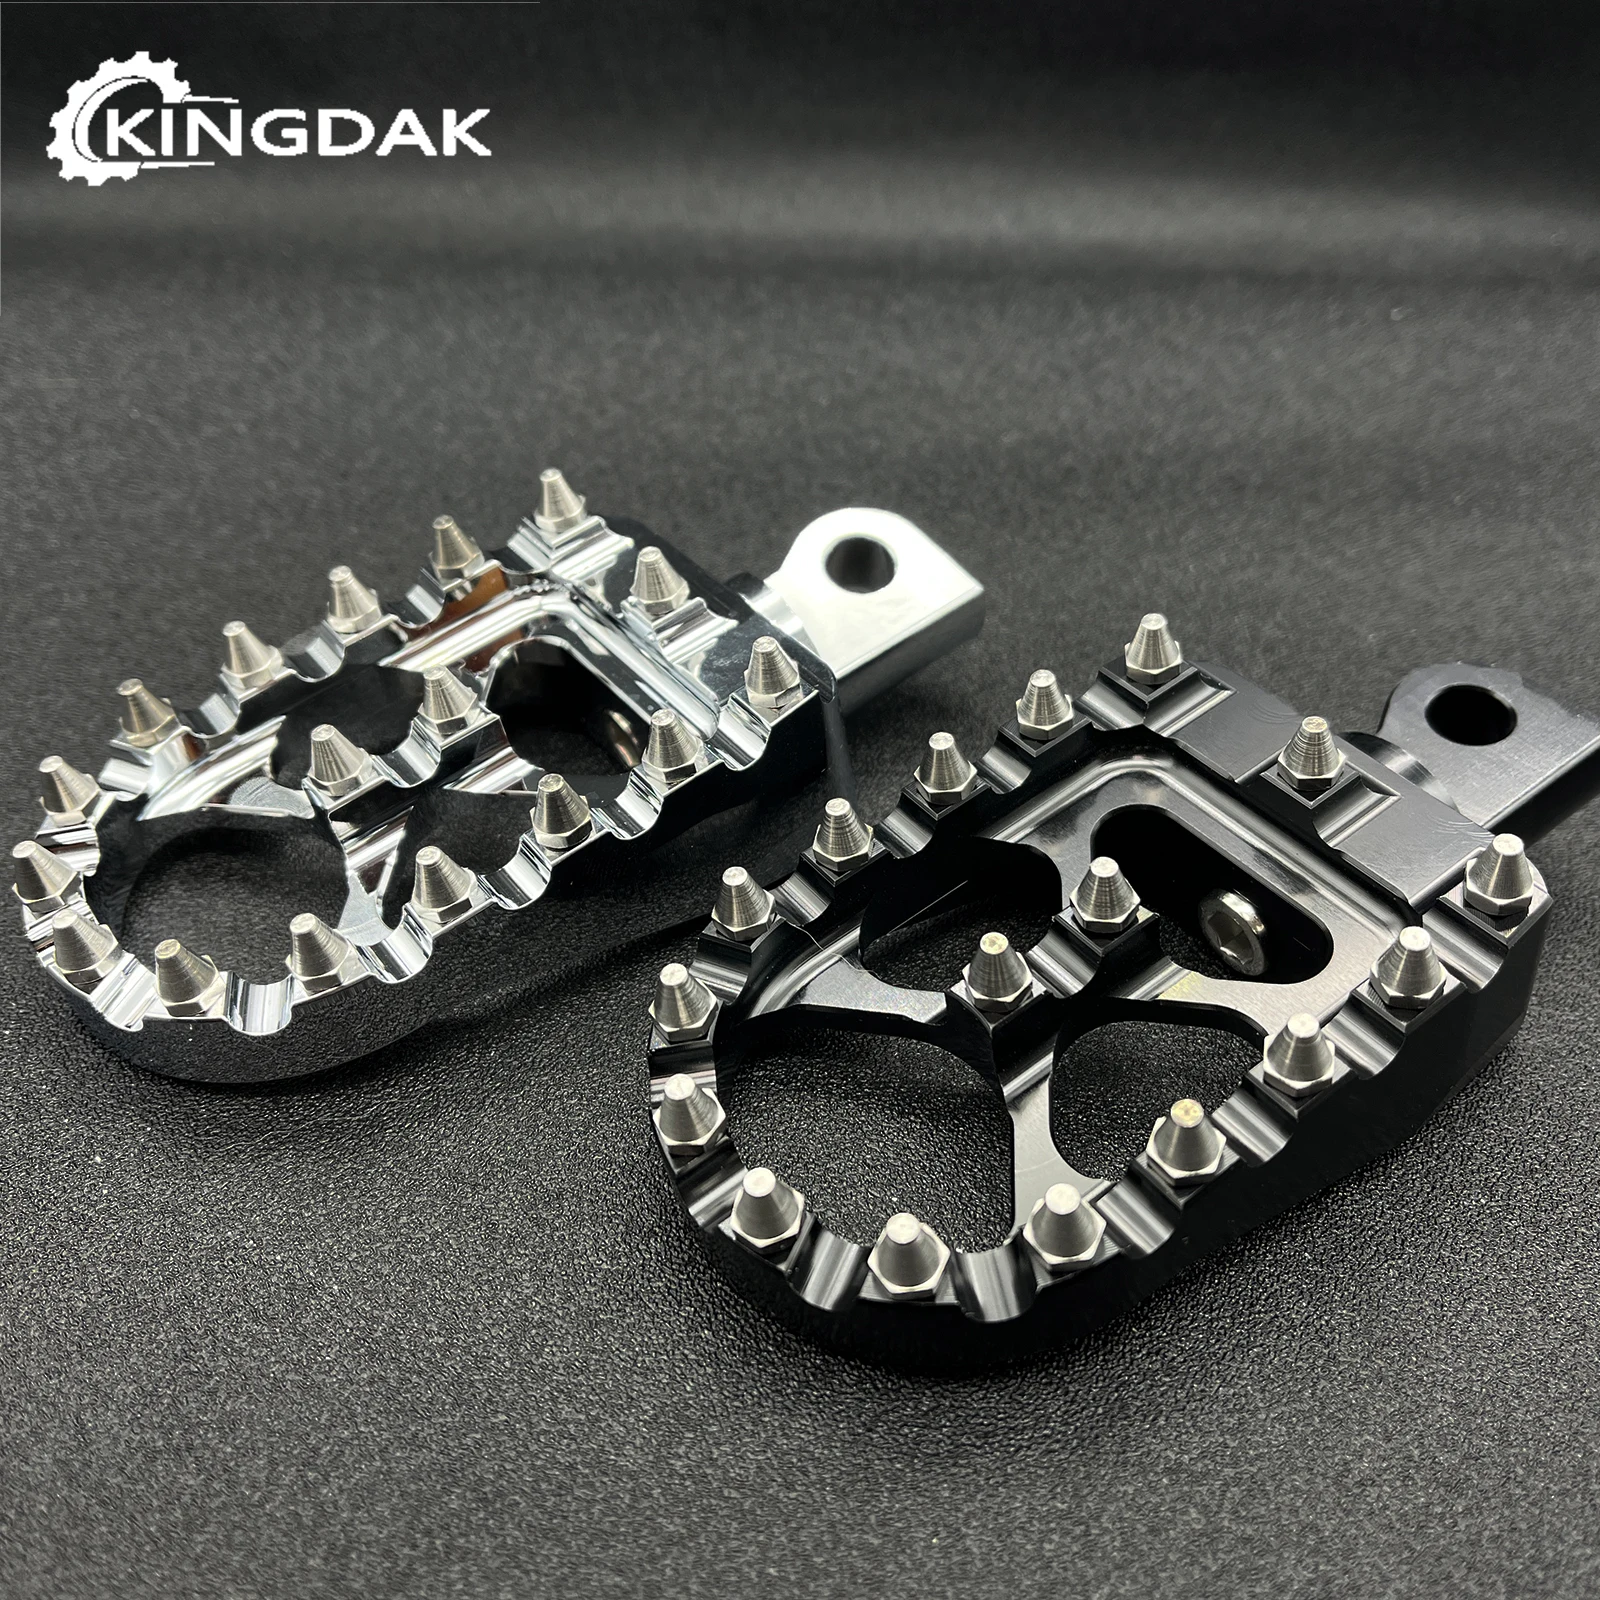 

MX Style CNC Wide Fat Foot Pegs Rests Fit For Harley Dyna Sportster Fatboy Iron 883 1200 Softail Touring Street Glide